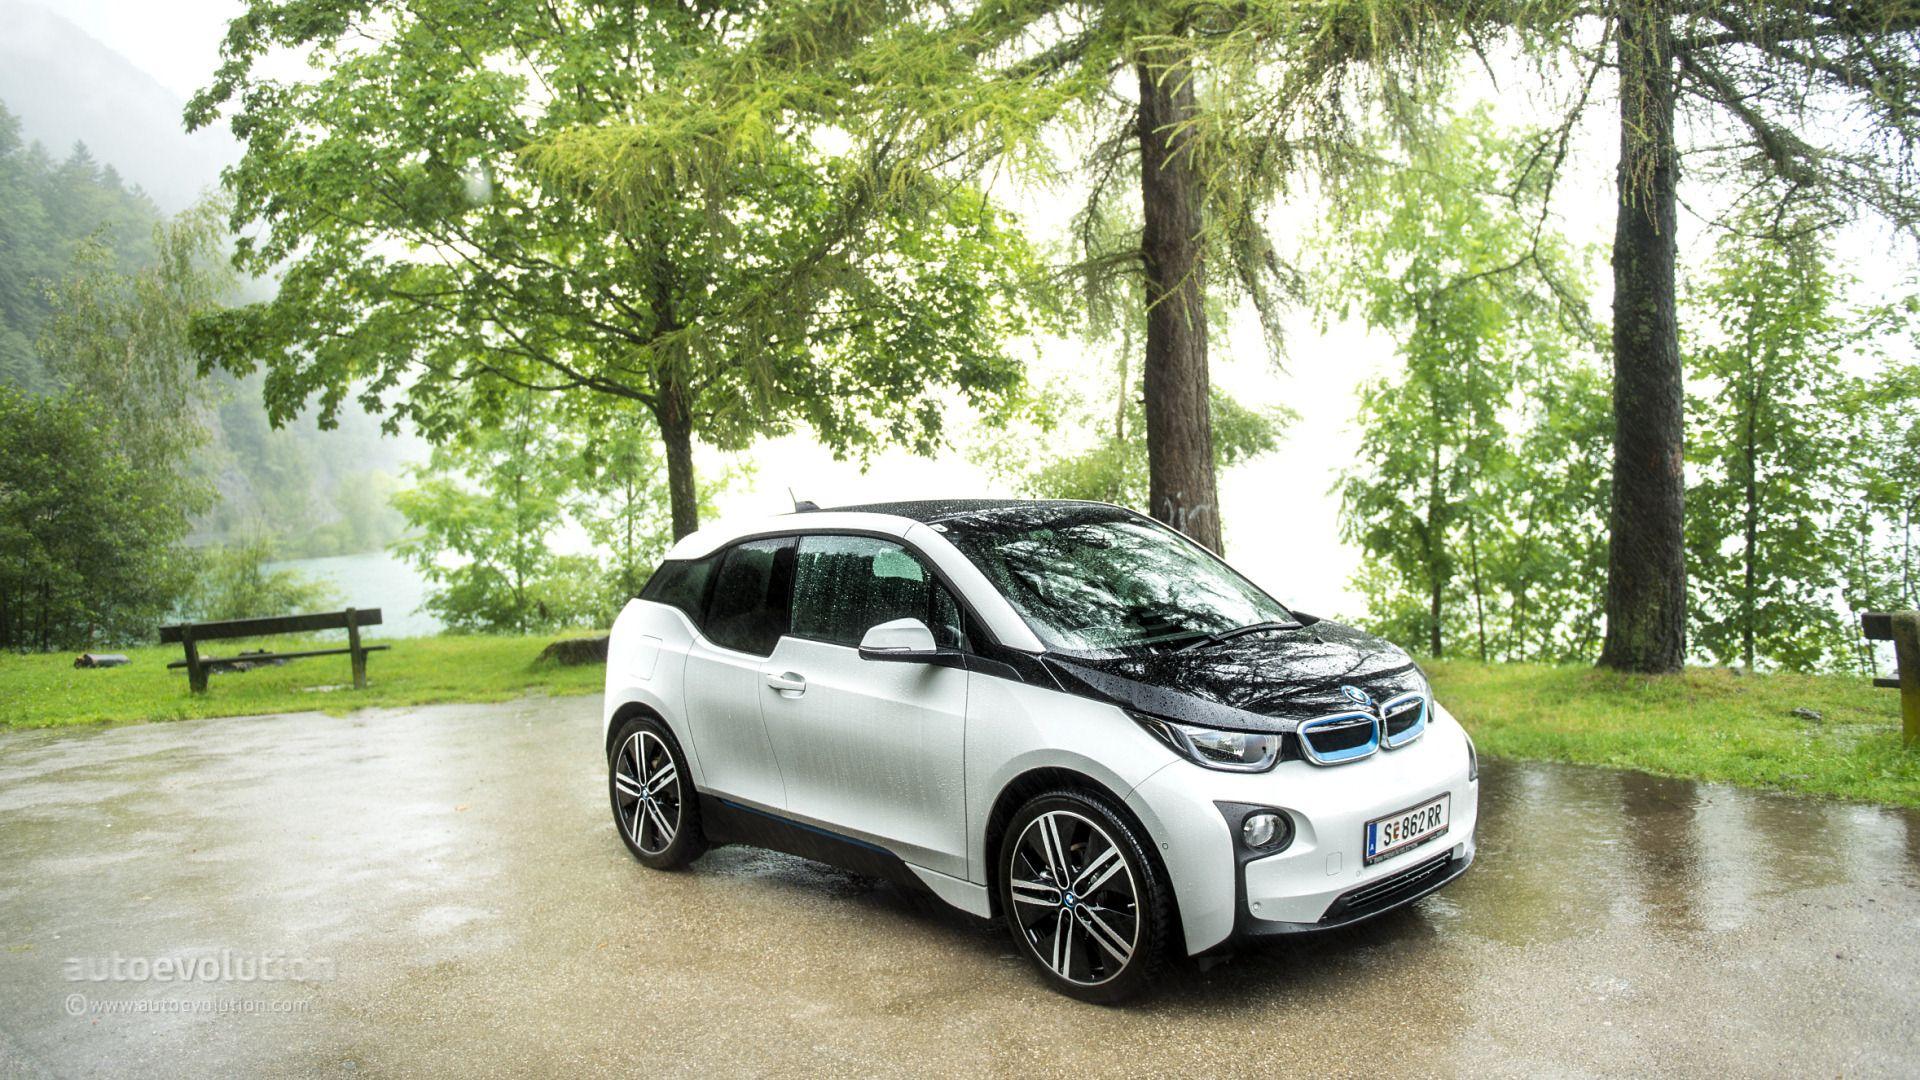 Bmw I3 Wallpapers Top Free Bmw I3 Backgrounds Wallpaperaccess